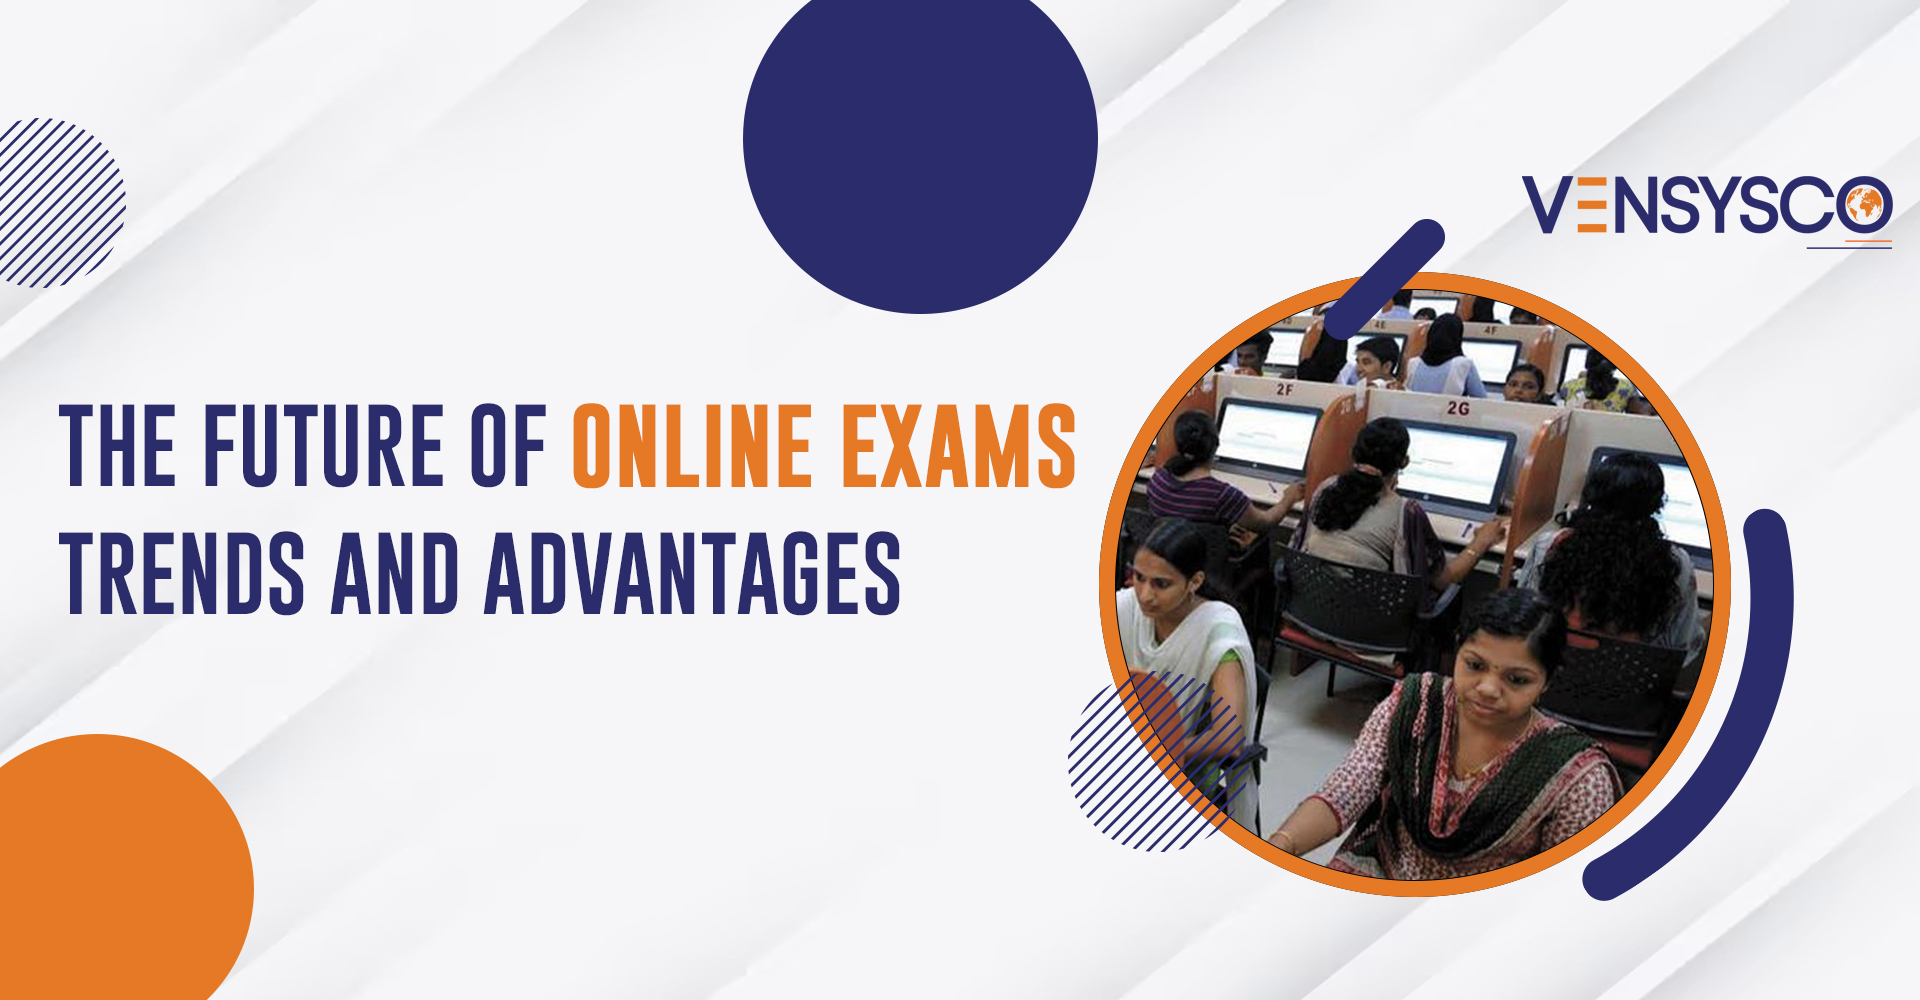 The Future of Online Exams: Trends and Advantages